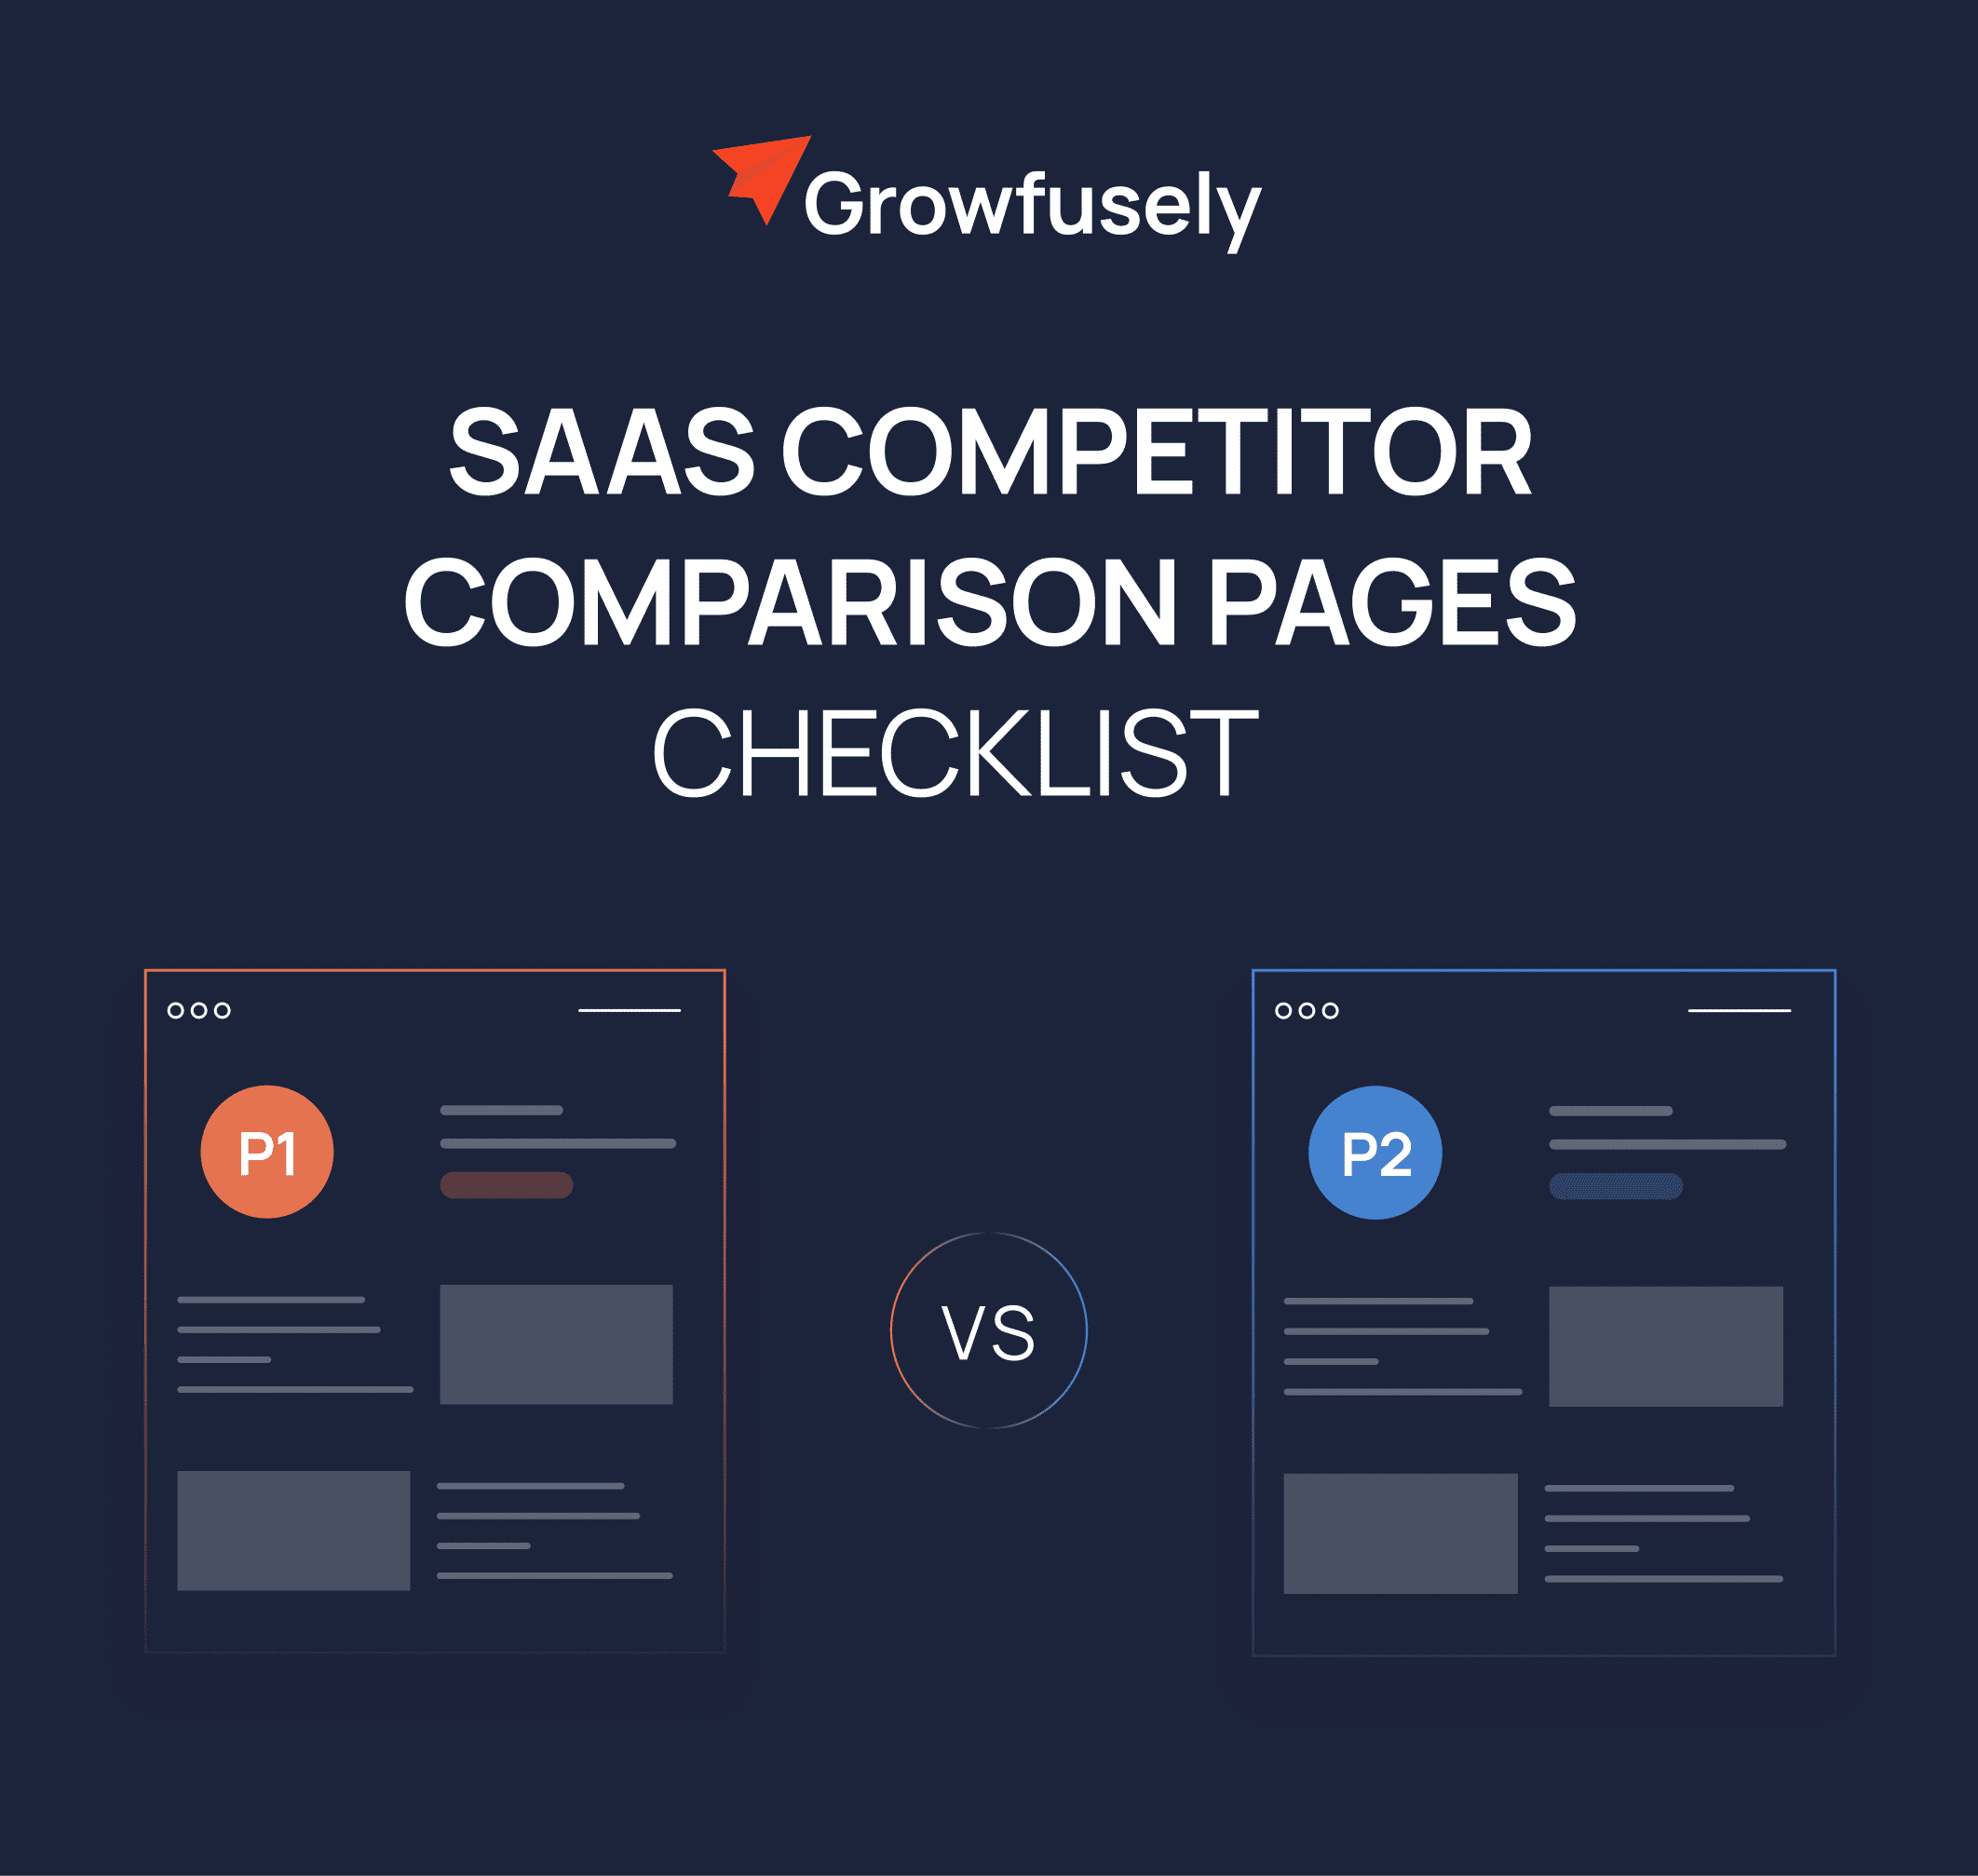 grofusely_saas_compettitor